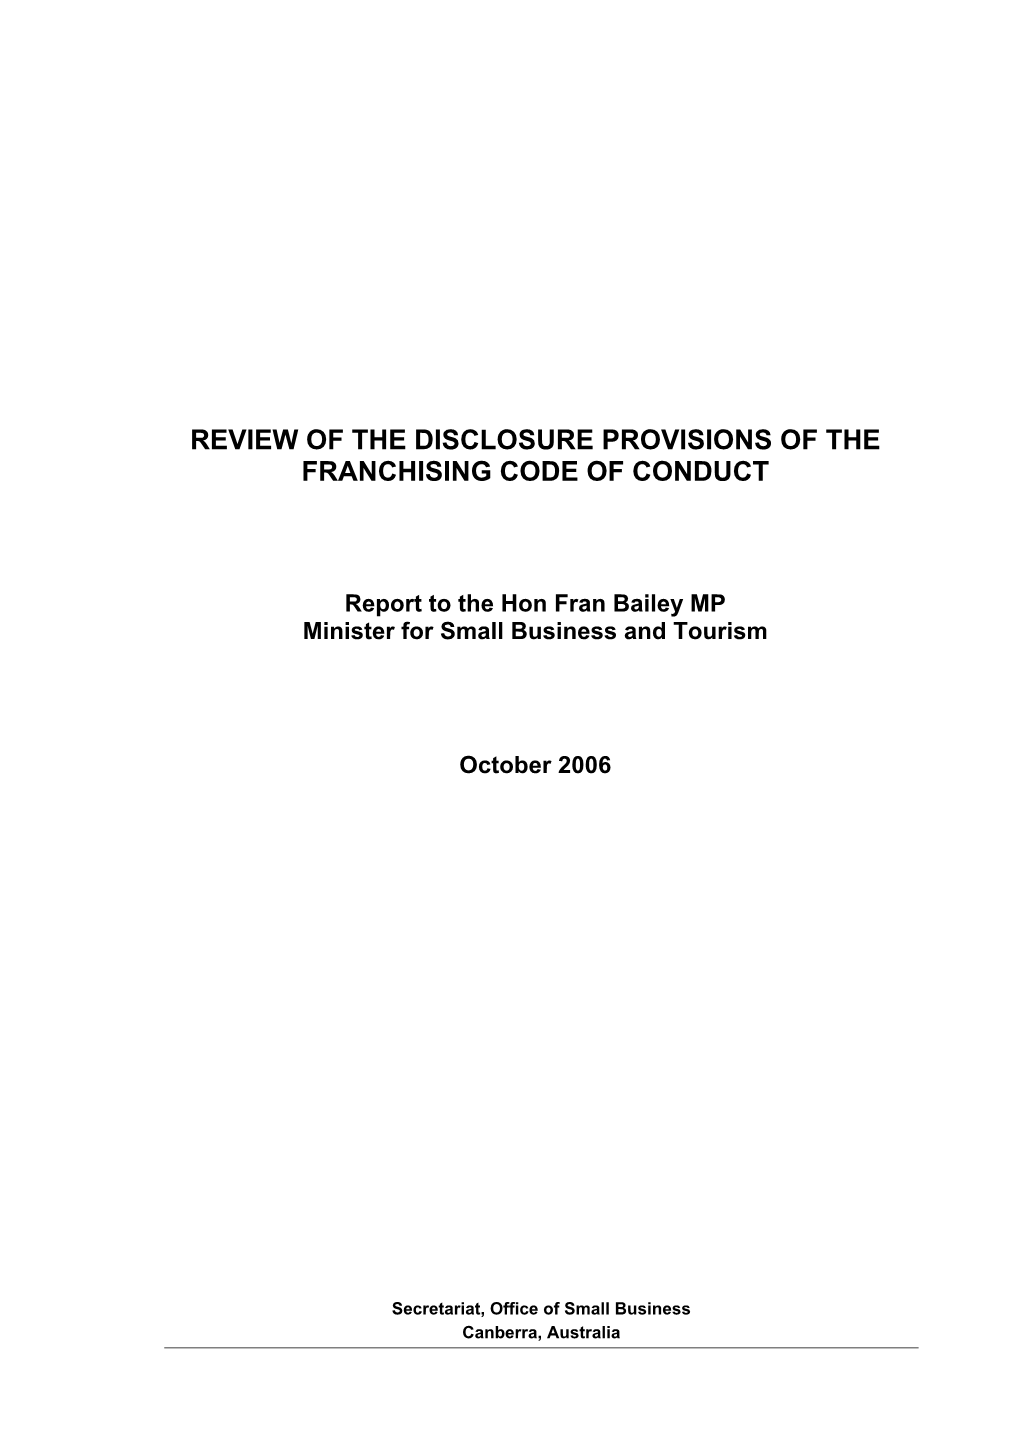 Report of the 2Nd Review of the Franchising Code of Conduct - October 2006